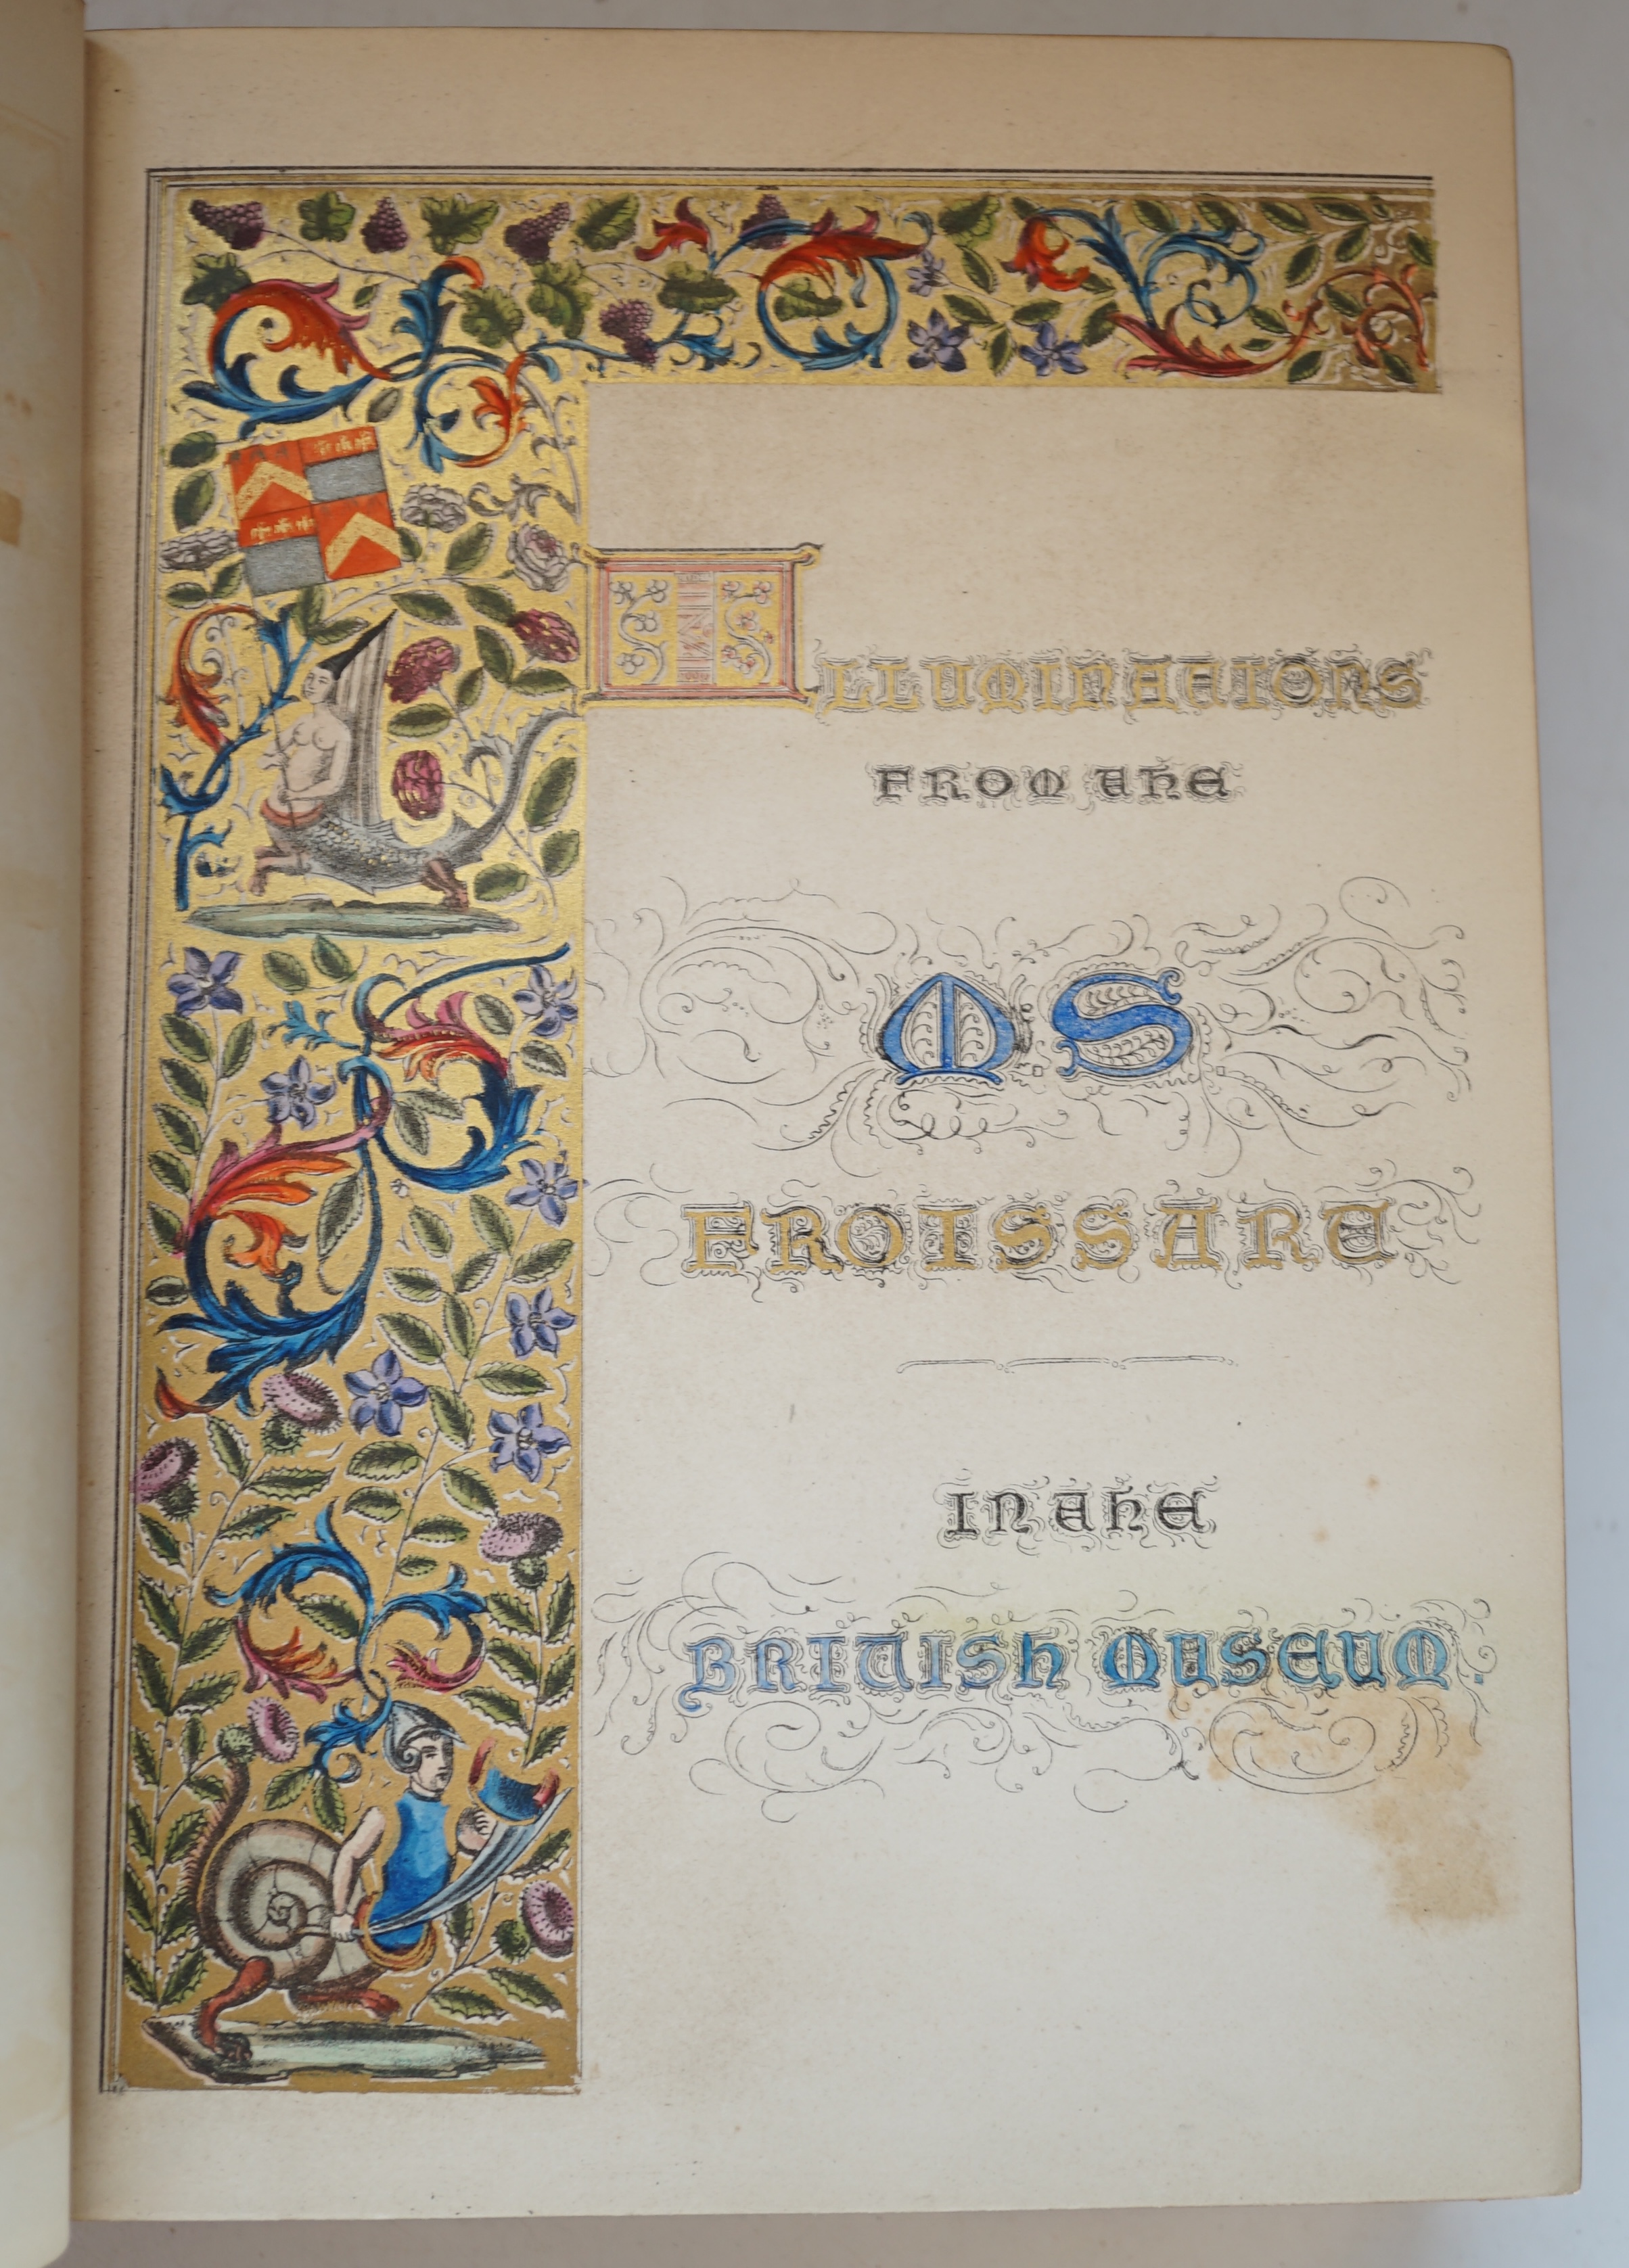 Froissart, Sir John - Chronicles of England, France and Spain…, translated by Thomas Johnes, lithographed frontispiece, 3 additional titles and 70 plates, most hand-coloured or partly so, some heightened with gold, conte